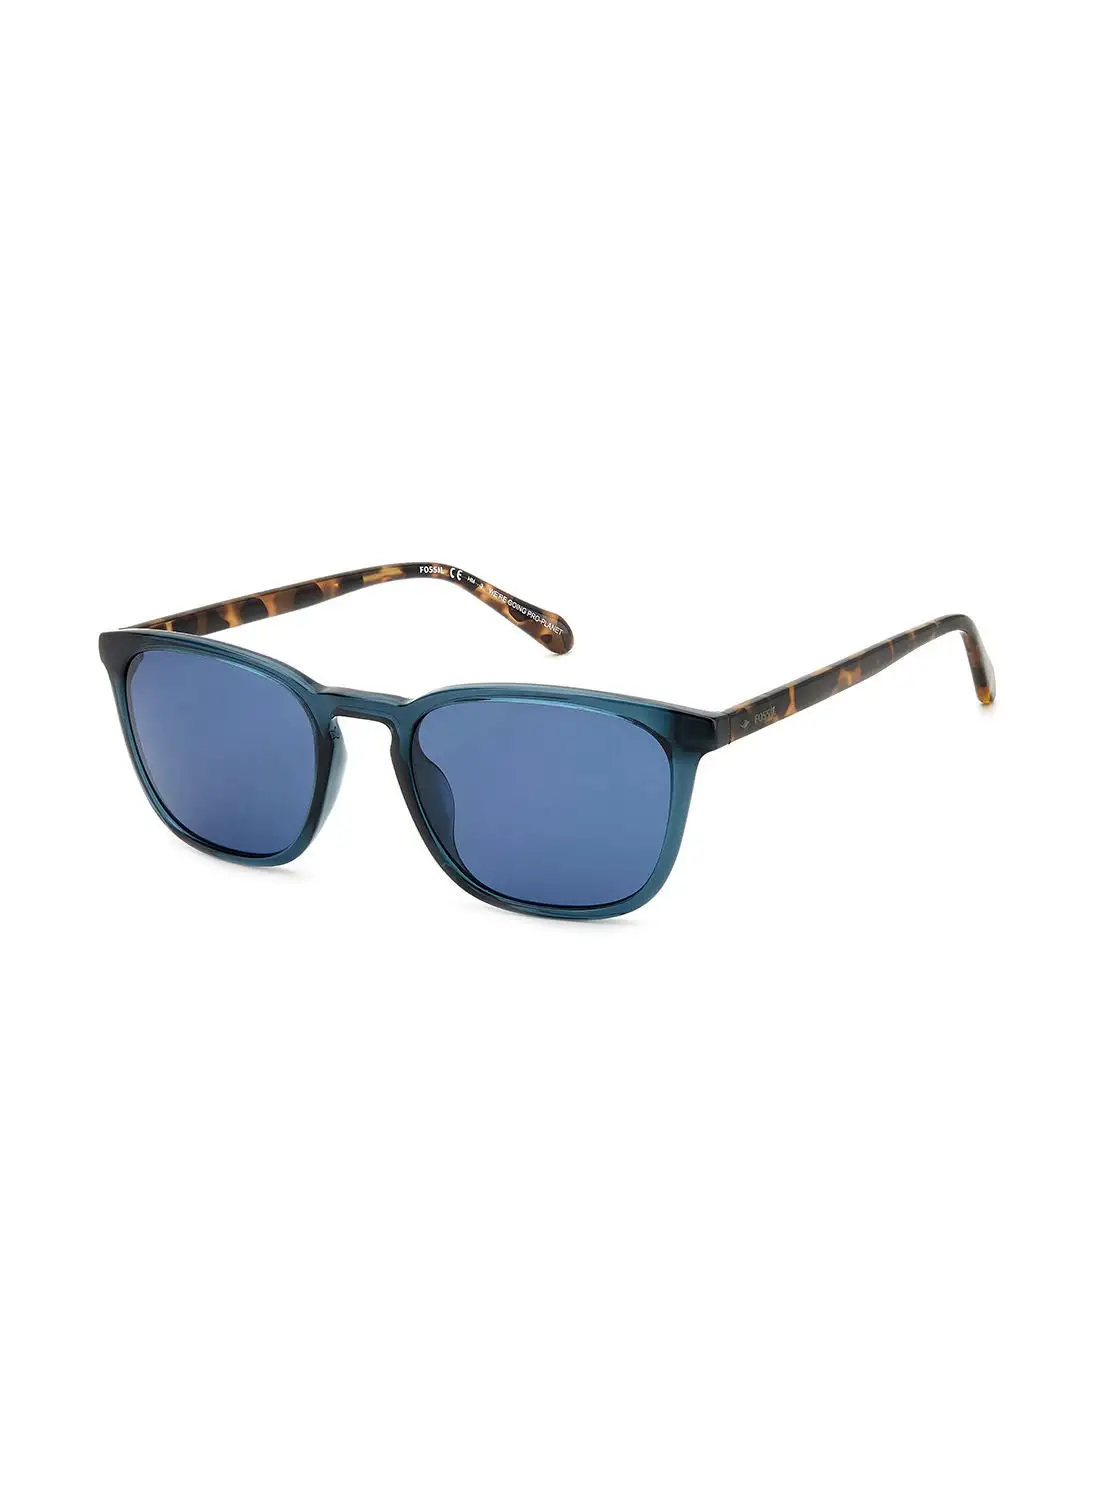 FOSSIL Men's UV Protection Square Sunglasses - Fos 2127/S Cry Teal 54 - Lens Size: 54 Mm